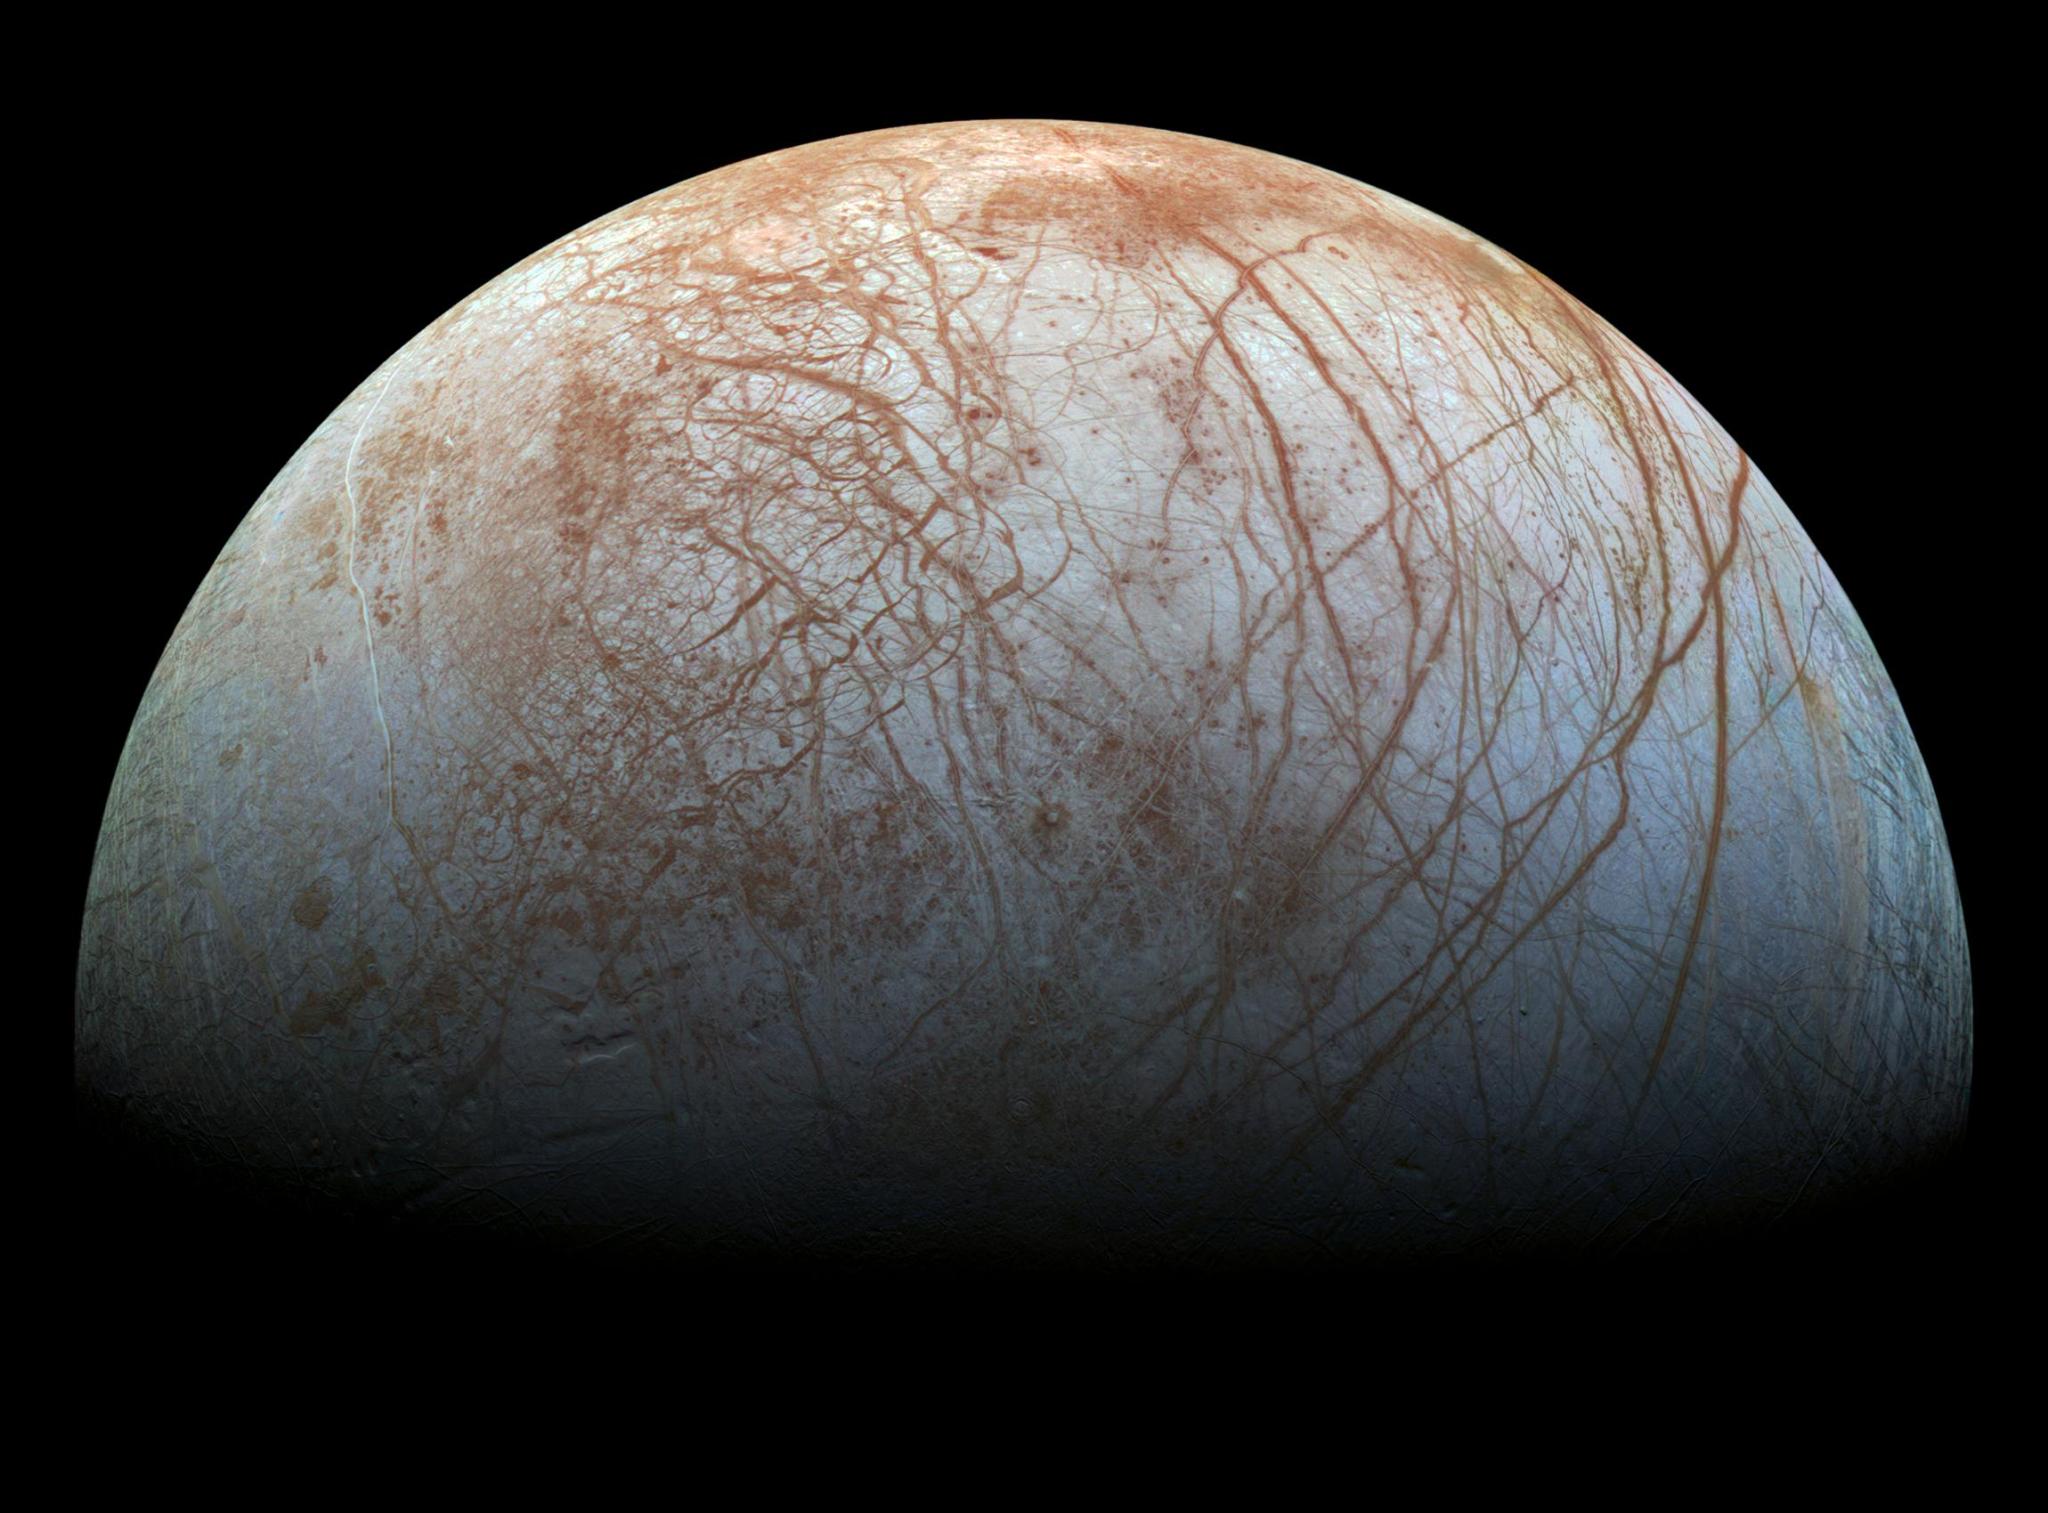 A view of Europa created from images taken by NASA's Galileo spacecraft in the late 1990s.